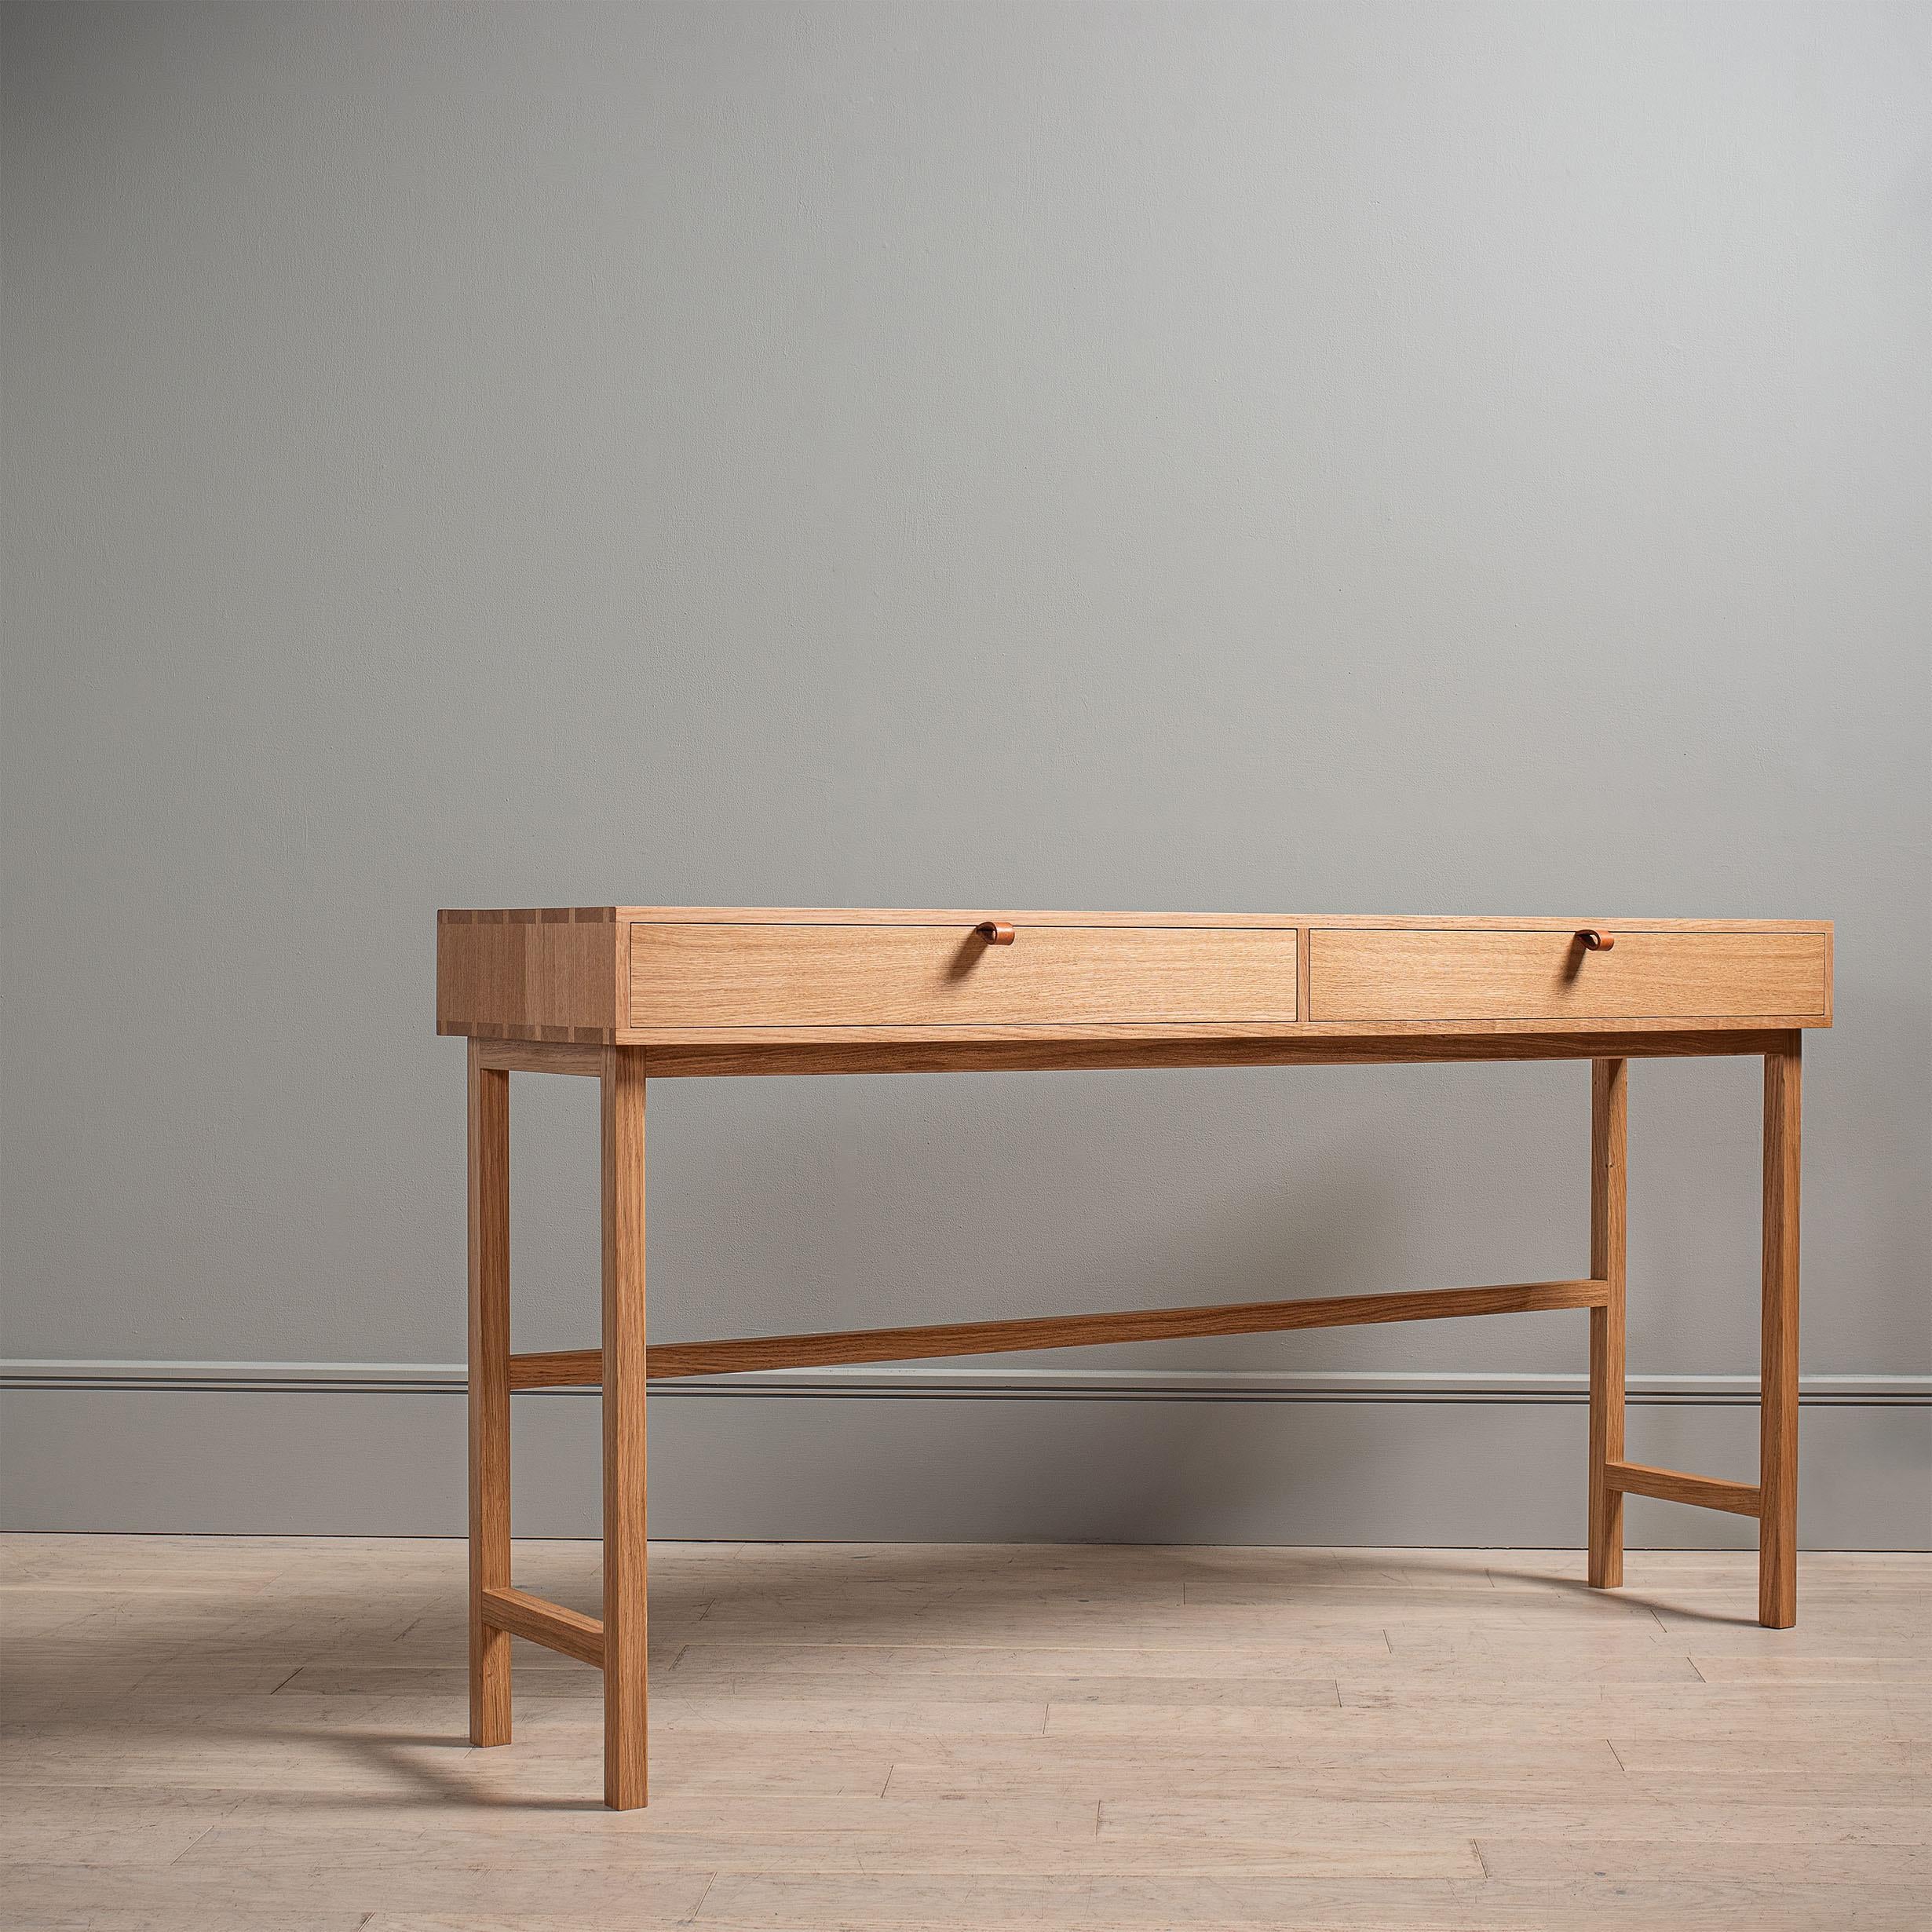 A new freestanding modern English oak desk design. Designed and handmade in England using skilled traditional furniture making techniques. Completely handcrafted from the finest fully quarter-sawn English oak. Hand dovetailed joints surround the oak